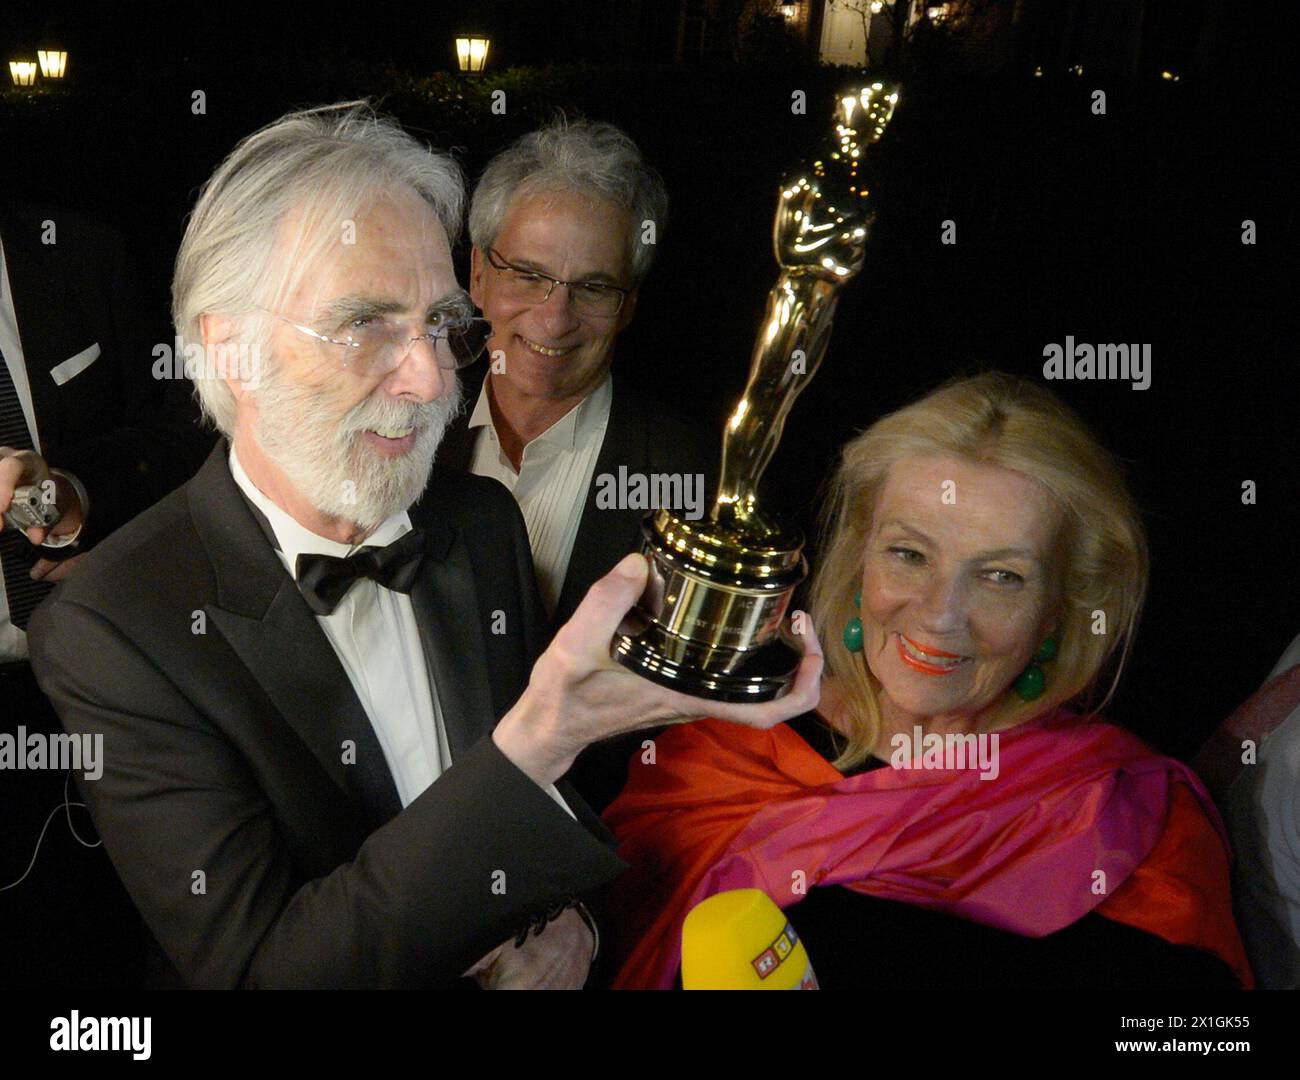 Austrian director Michael Haneke received an Oscar for Best Foreign Language Film of the Year for 'Amour' during the 85th Academy Awards at the Dolby Theatre in Hollywood, California, USA, 24 February 2013.    PICTURE: Michael Haneke and his wife Susanne. - 20130225 PD0288 - Rechteinfo: Rights Managed (RM) Stock Photo